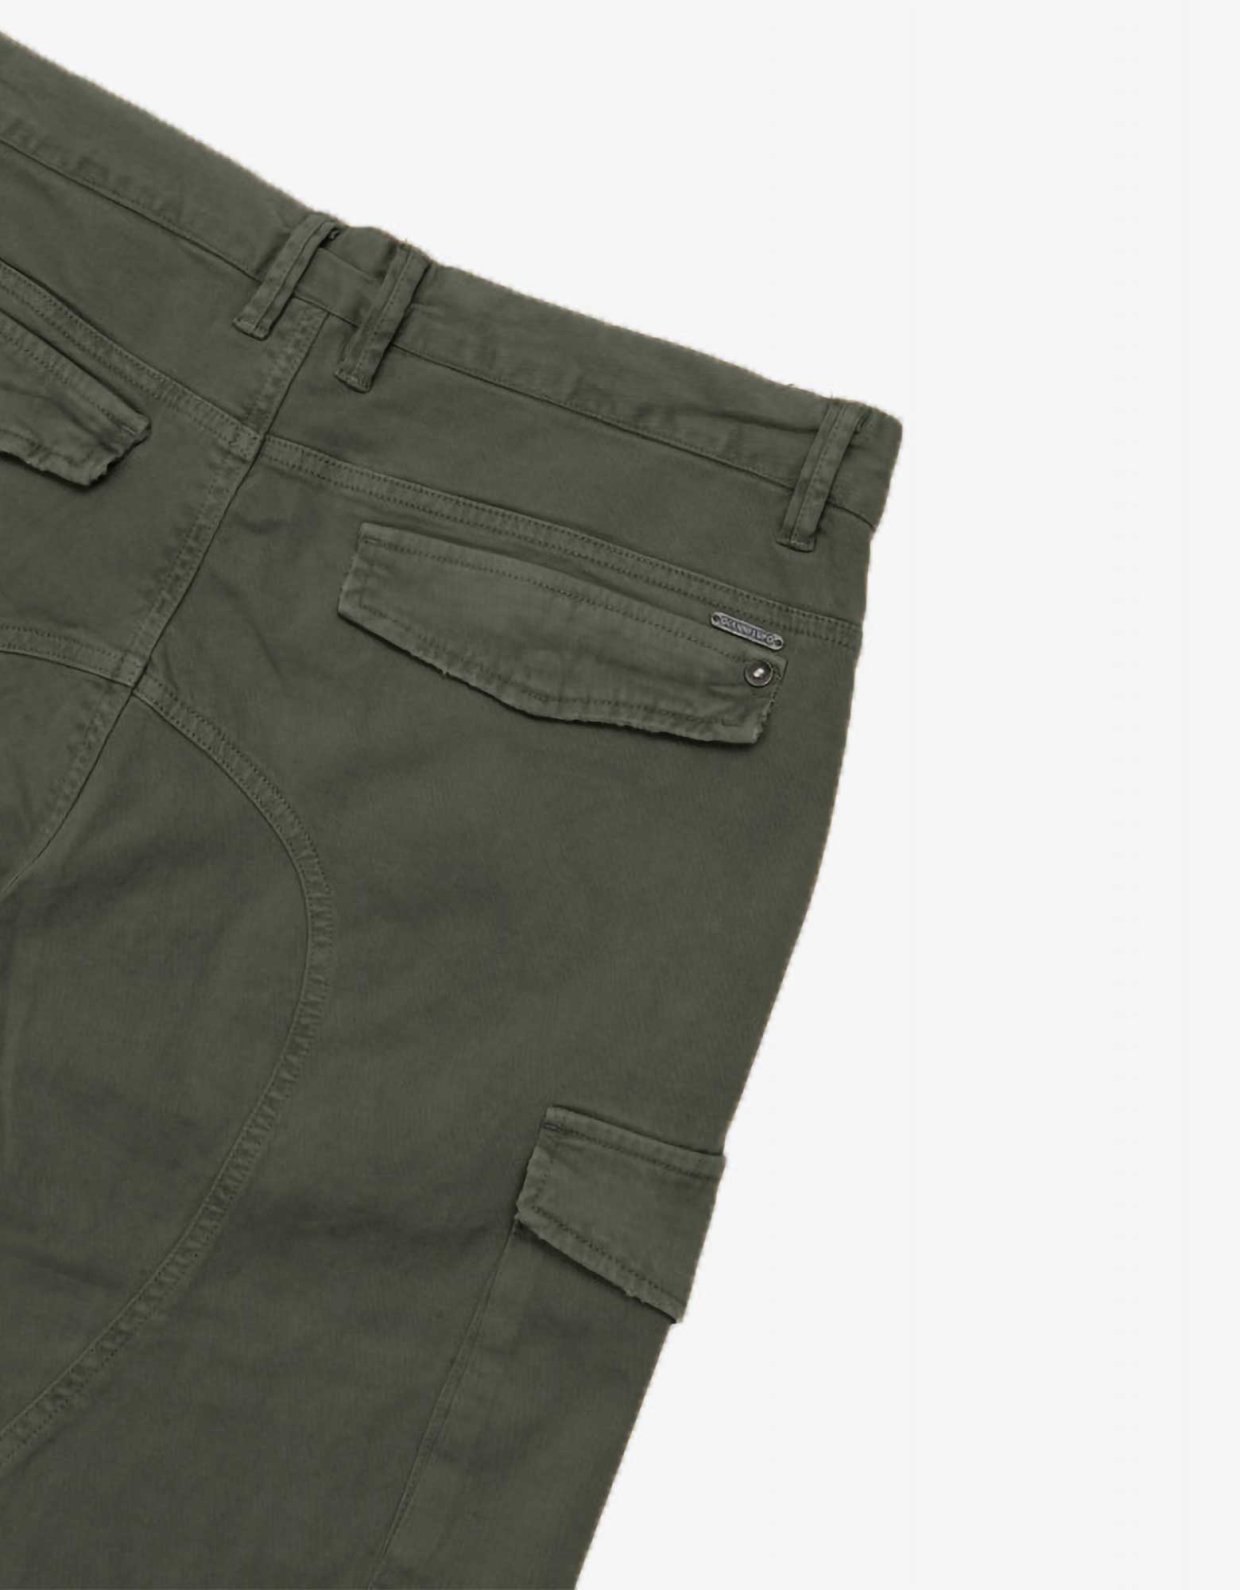 Gianni Lupo Slim fit cargo pants military